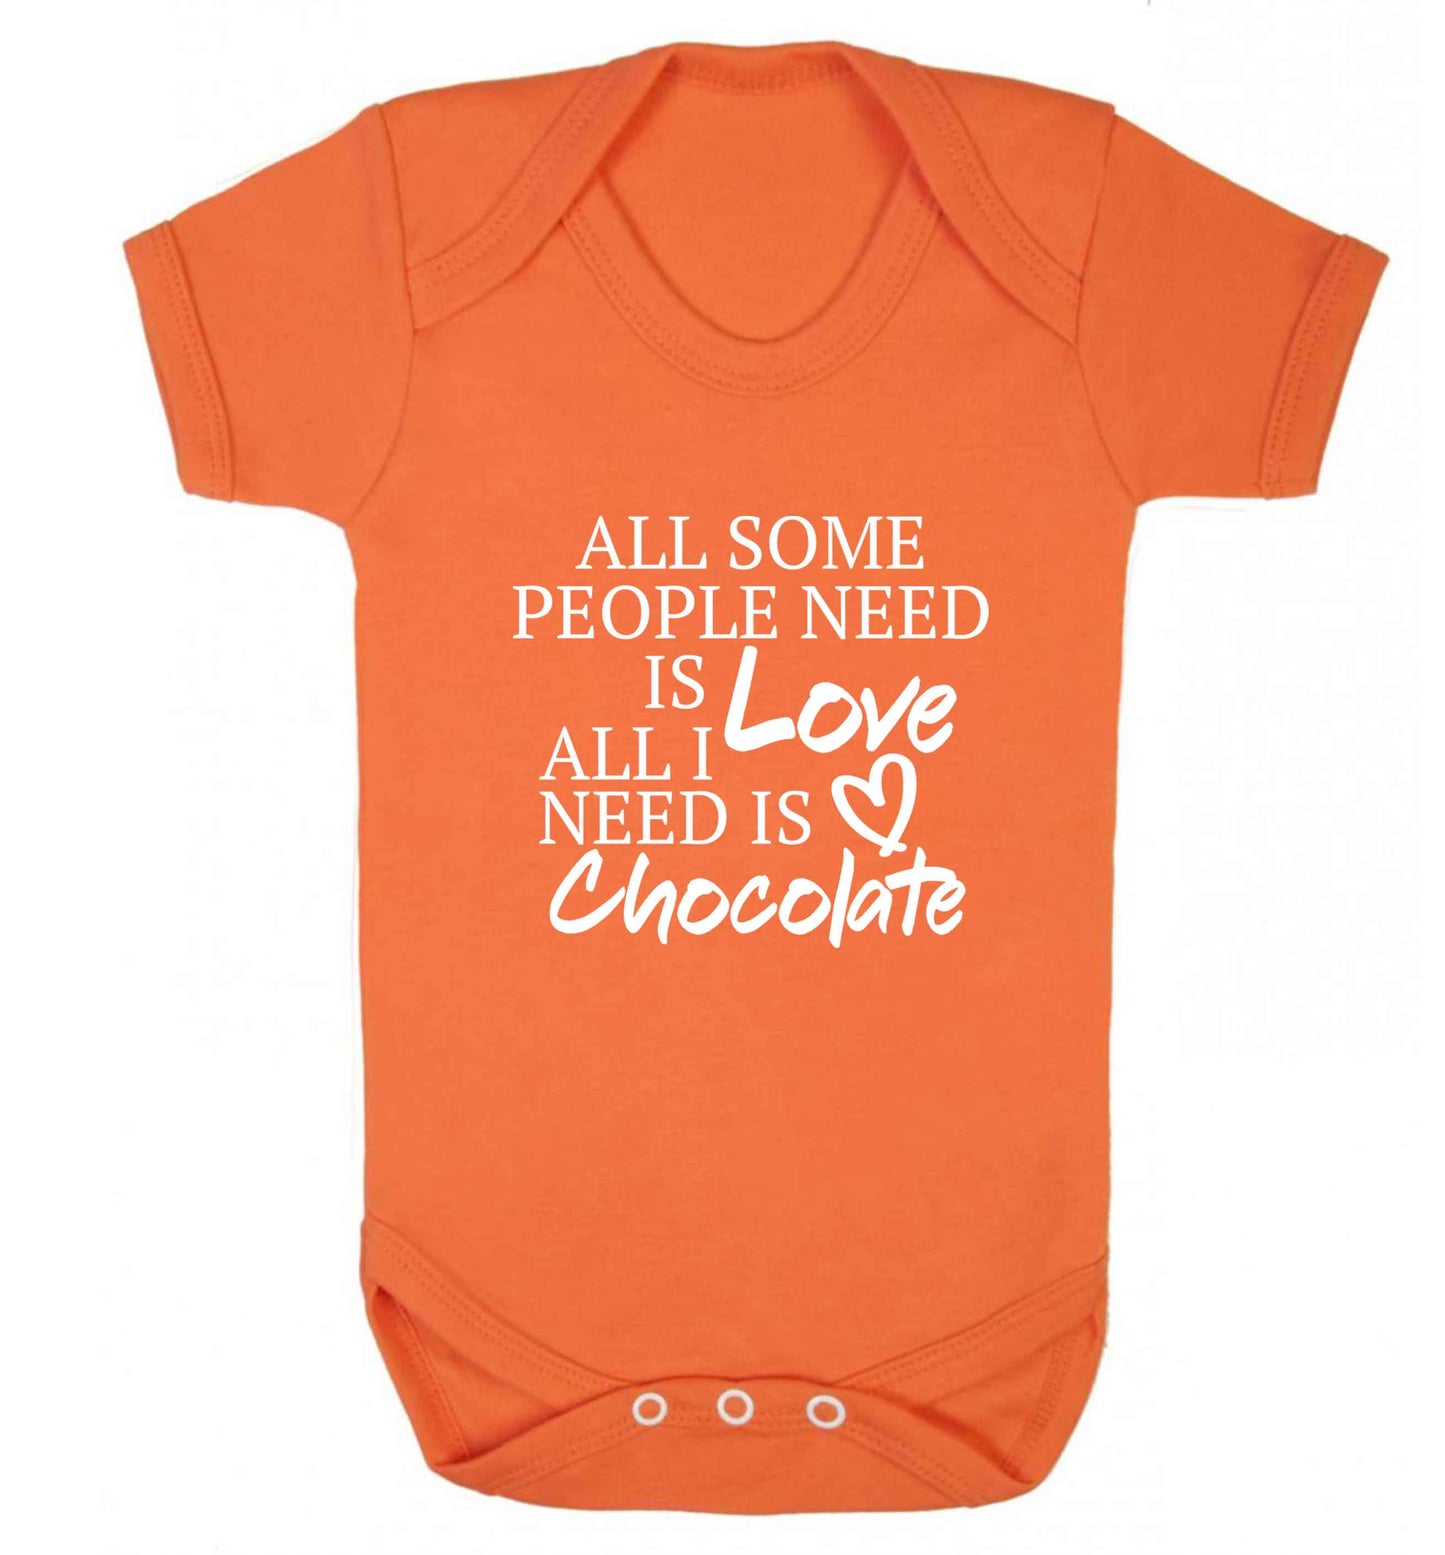 All some people need is love all I need is chocolate baby vest orange 18-24 months